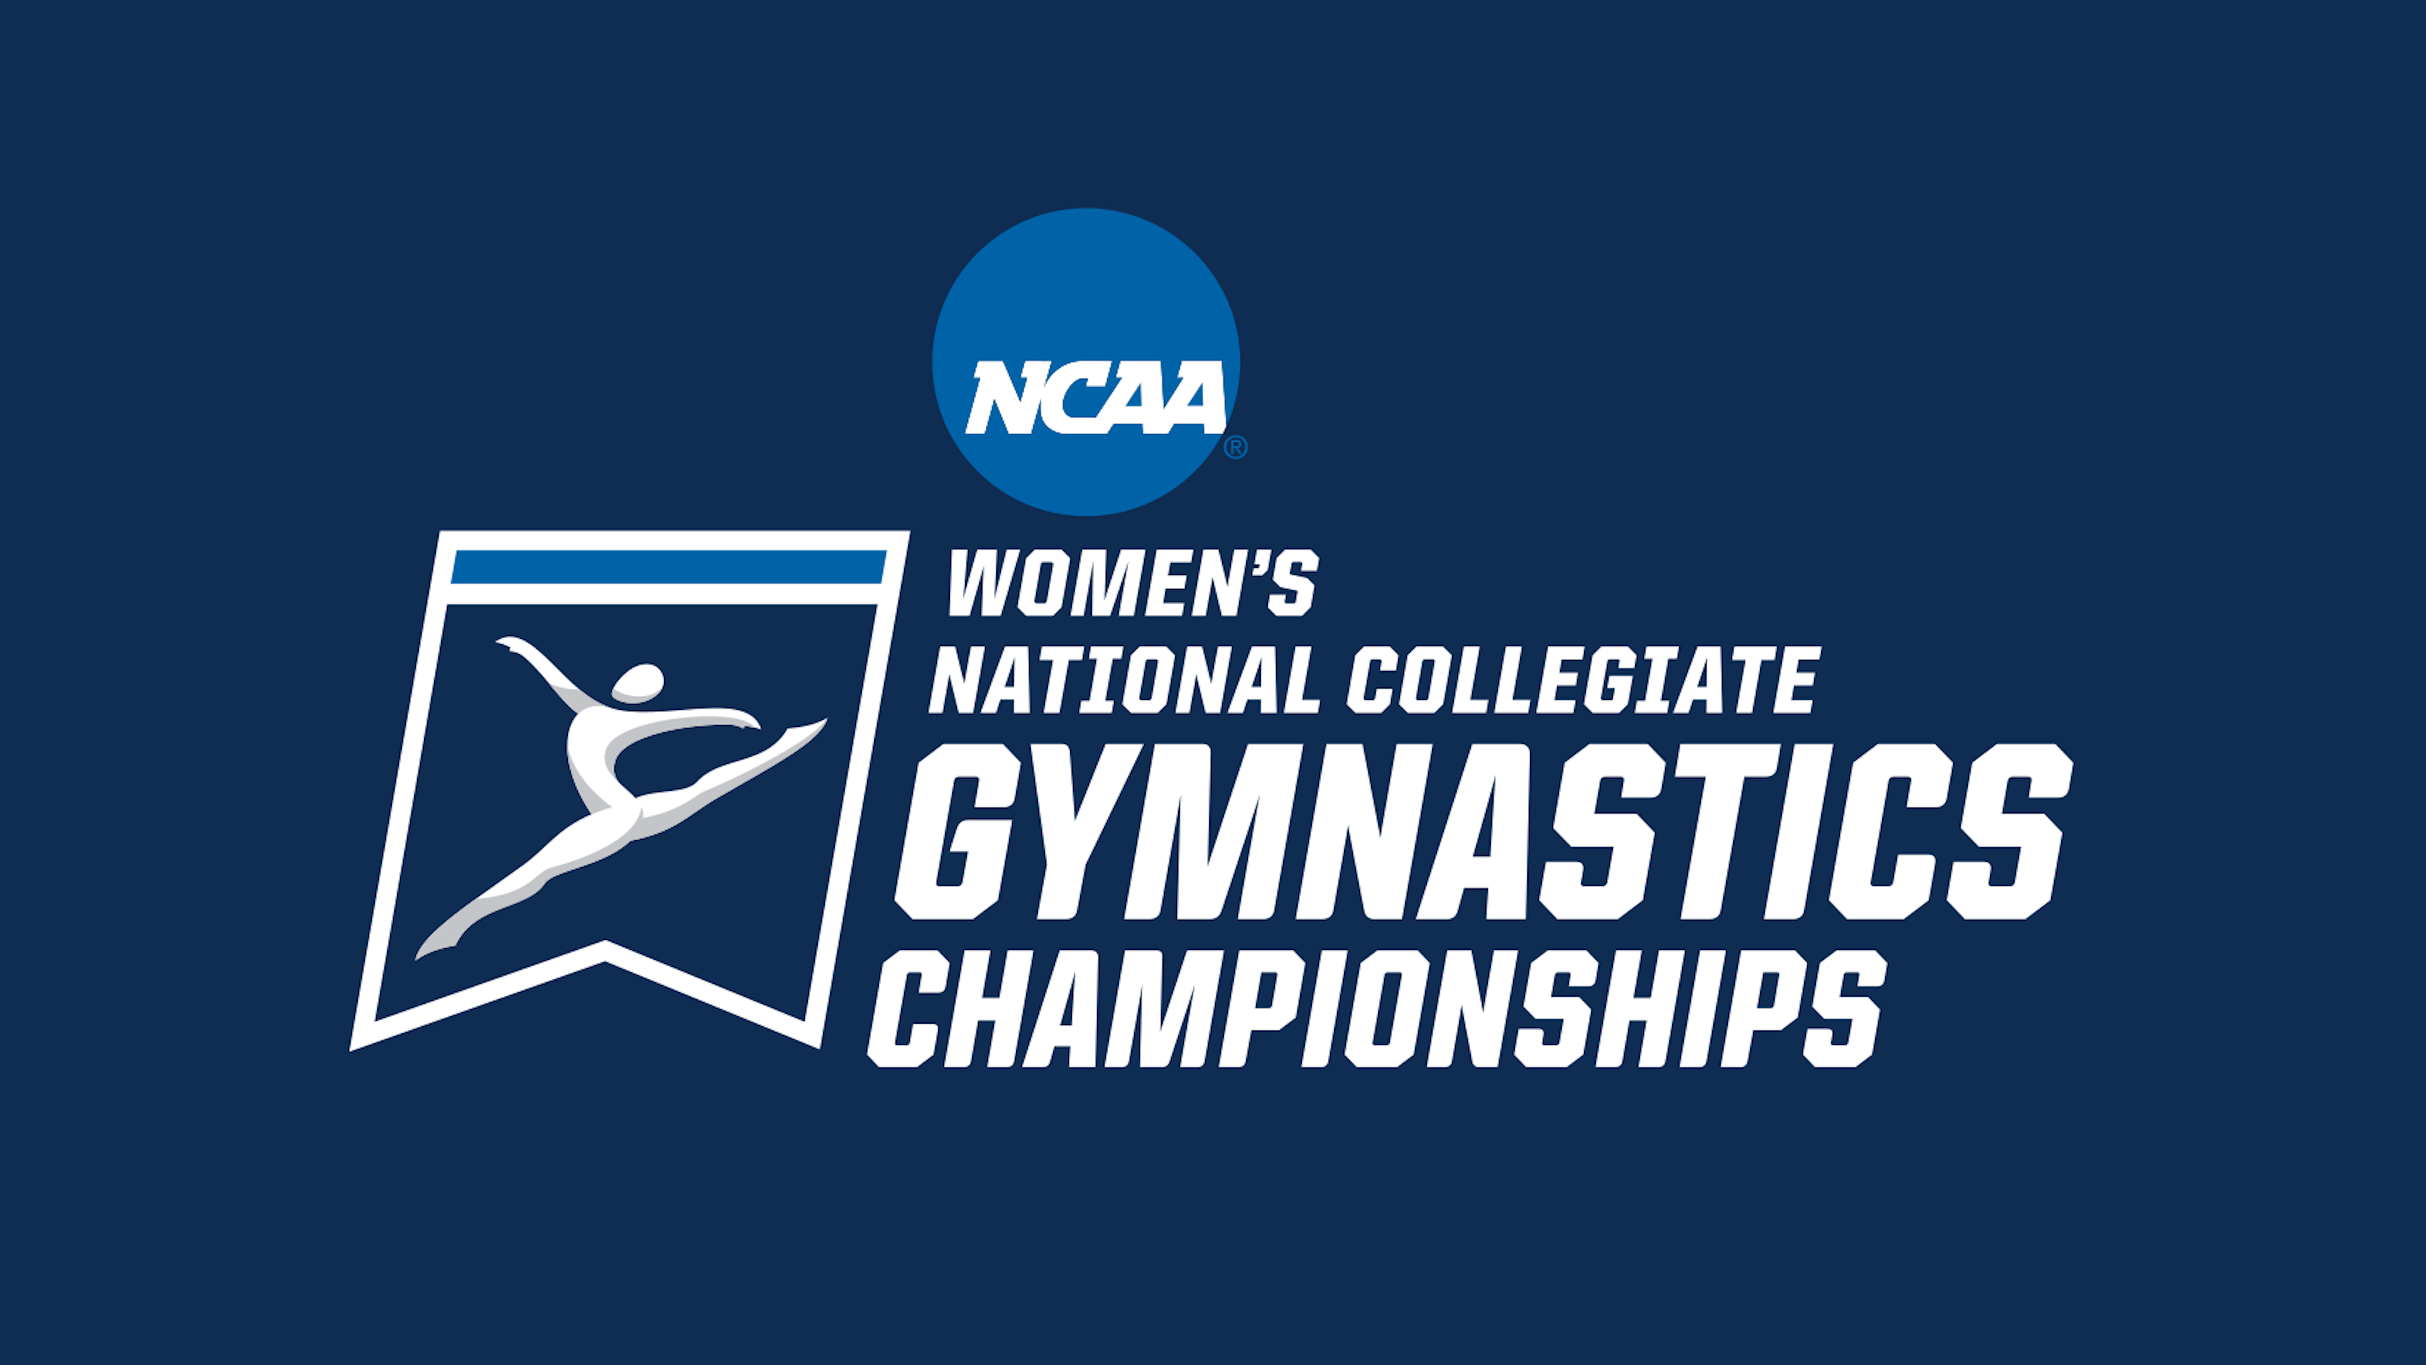 NCAA Women's Gymnastics Championships - Semifinals 1 in Fort Worth promo photo for Exclusive presale offer code